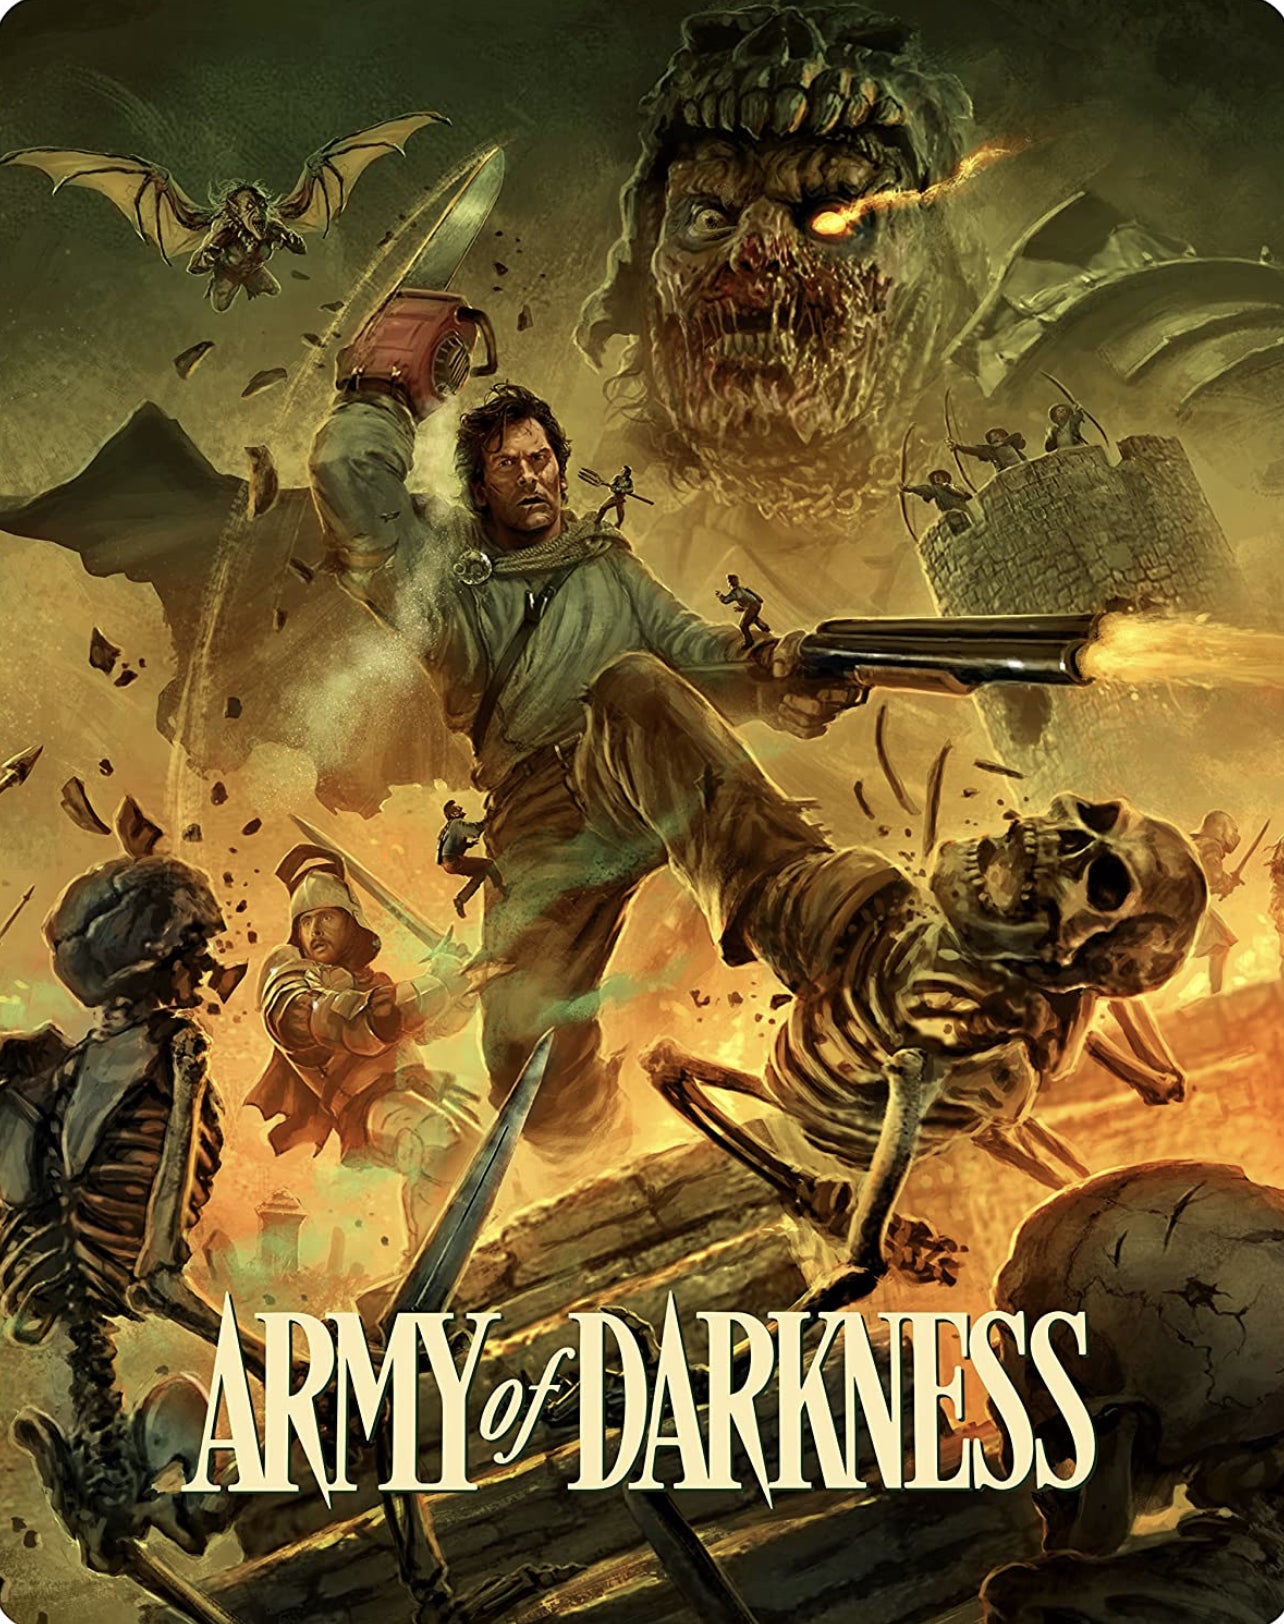 ARMY OF DARKNESS (LIMITED EDITION) 4K UHD/BLU-RAY STEELBOOK